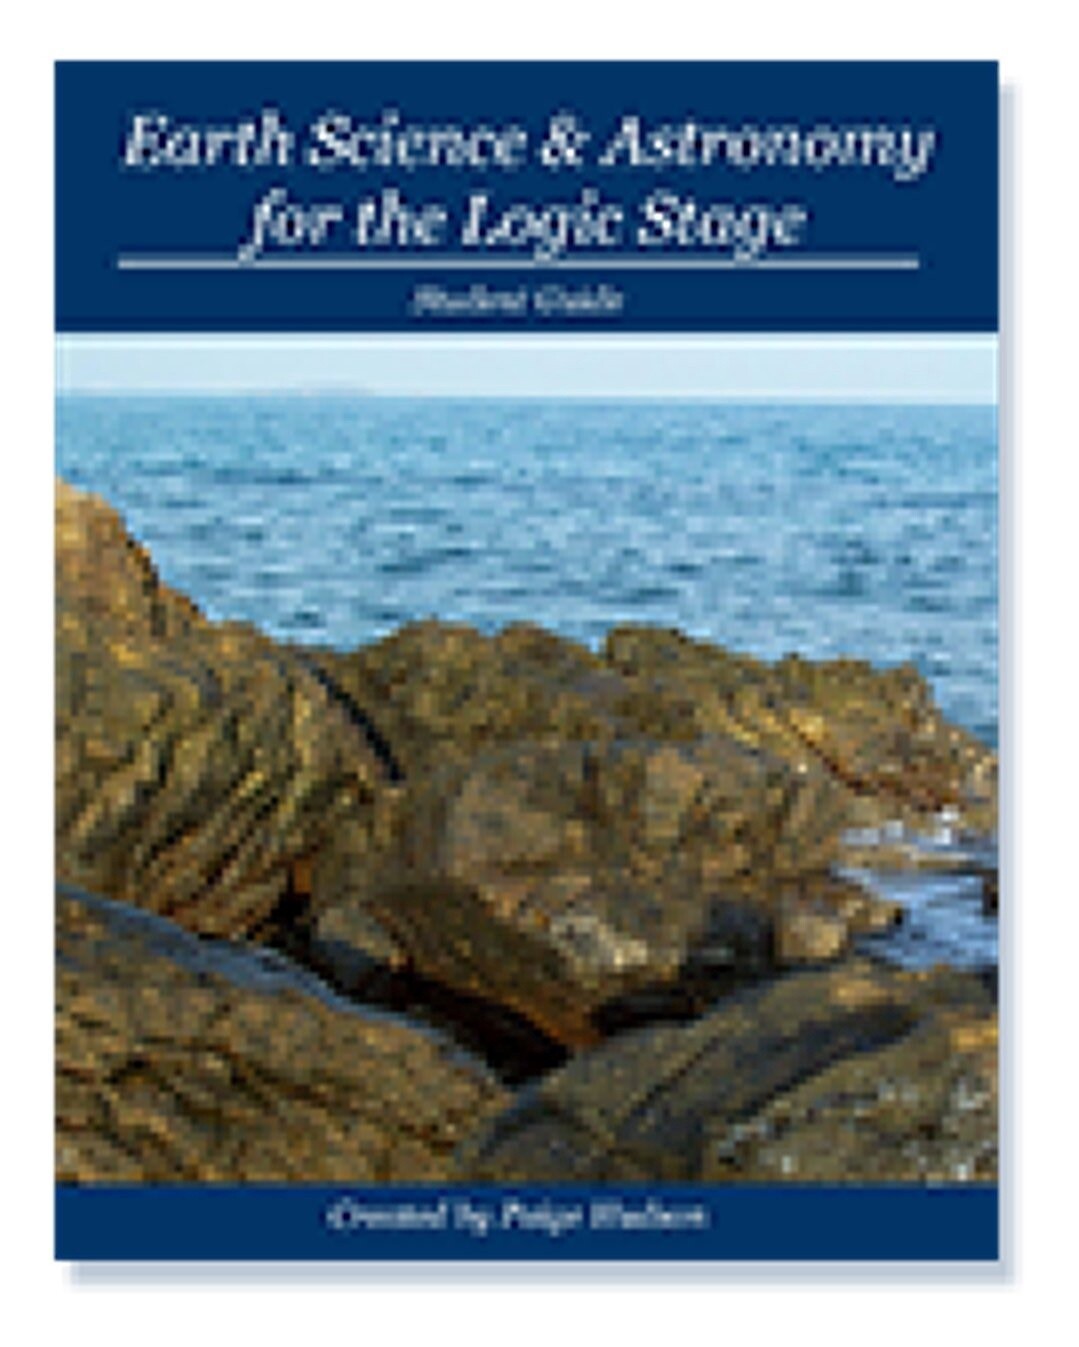 USED EARTH SCIENCE& ASTRONOMY FOR THE LOGIC STAGE Student guide